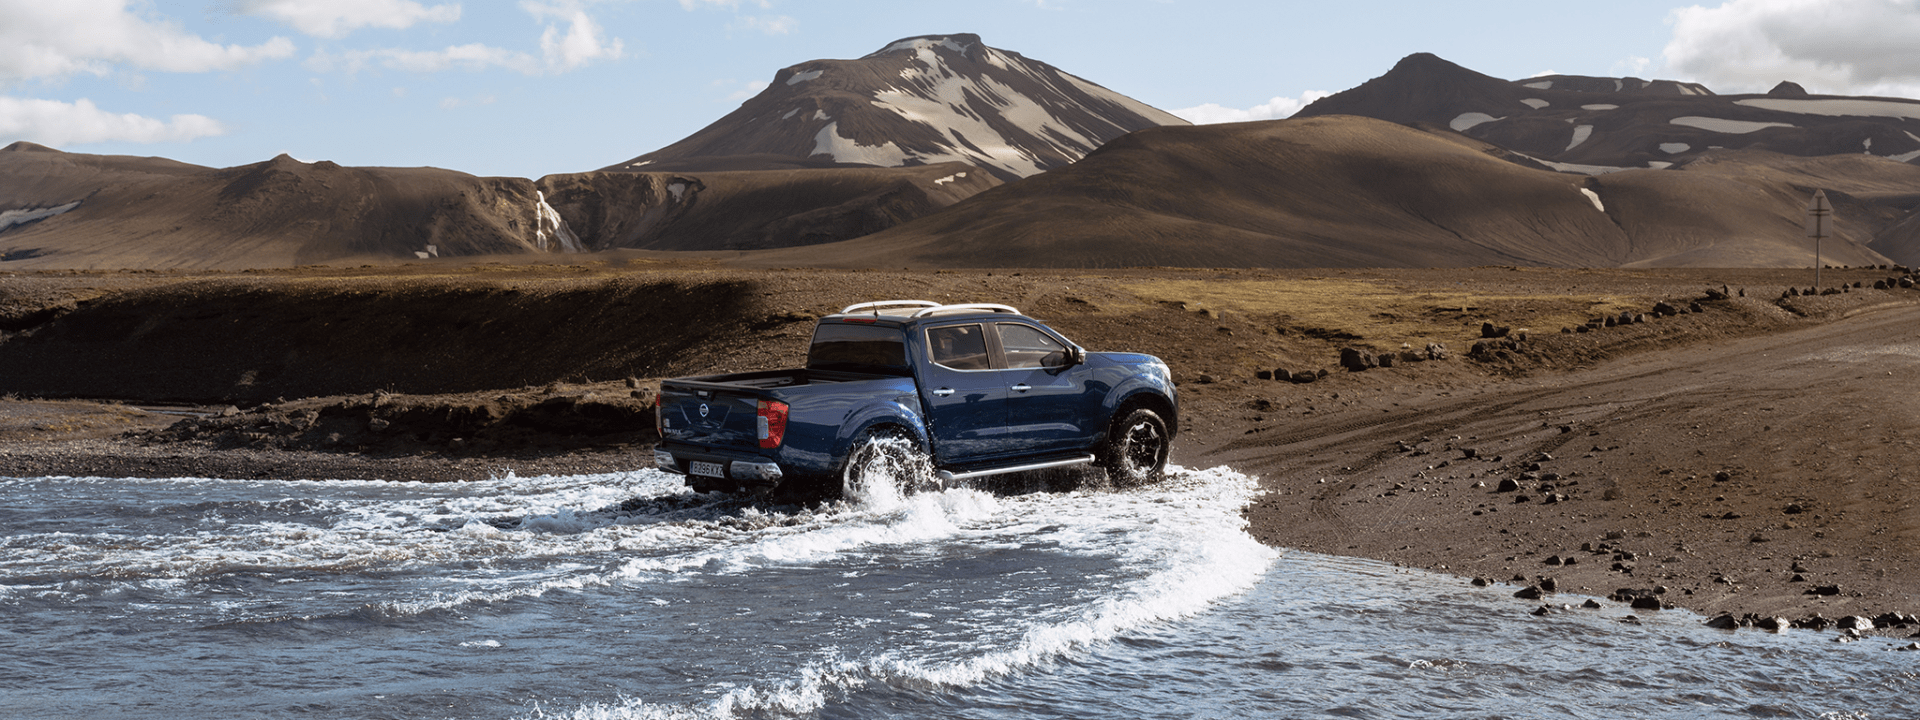 Pick-up in water